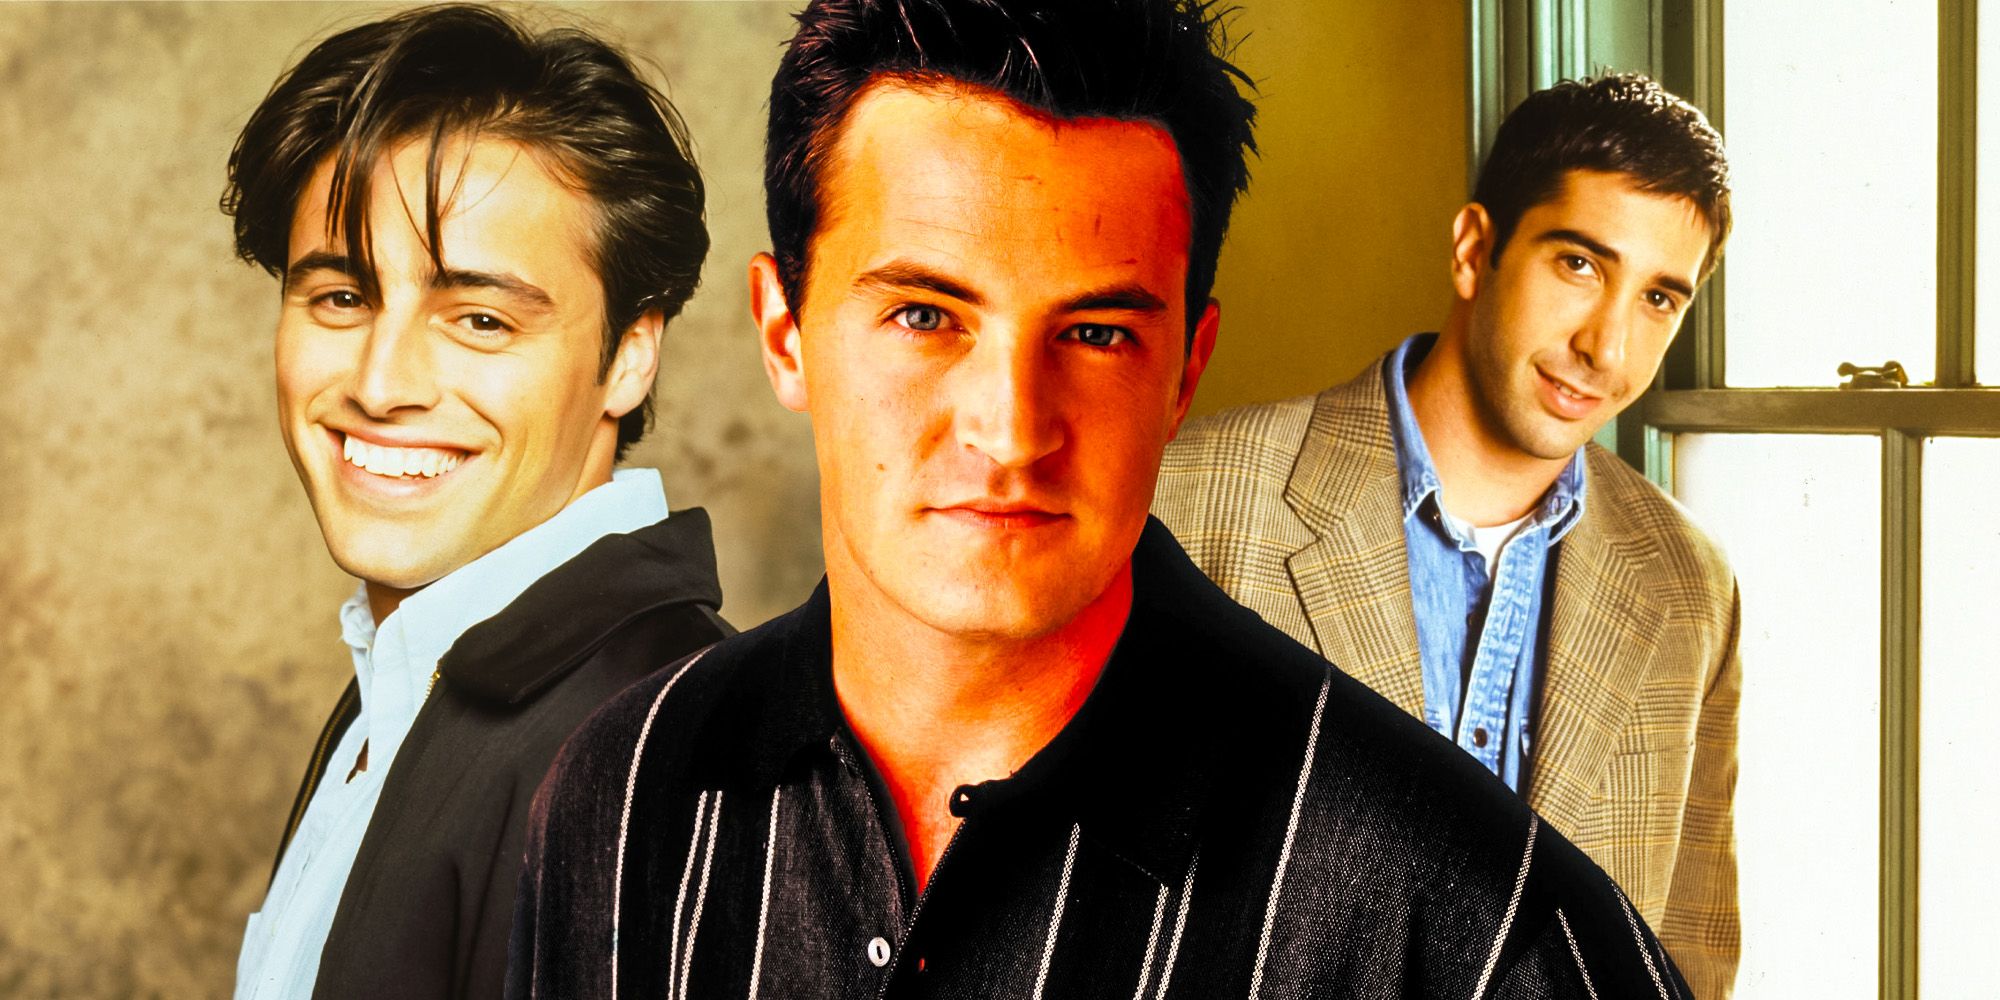 Chandler beat joey and ross in three friends moments